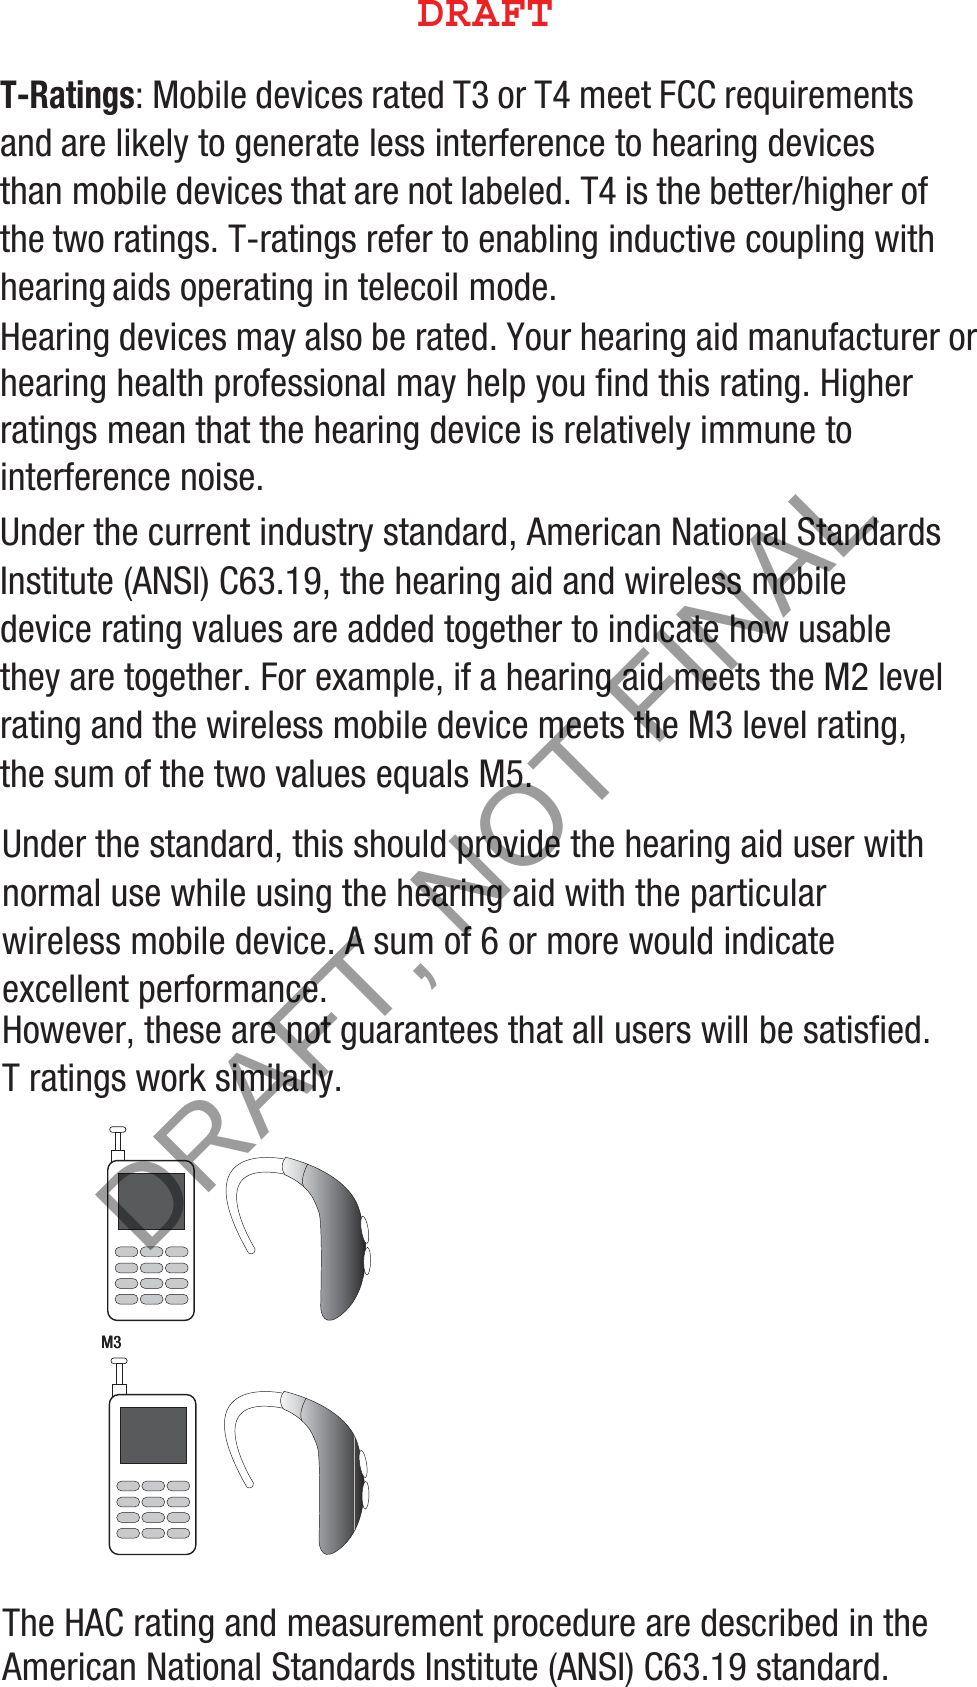 T-Ratings: Mobile devices rated T3 or T4 meet FCC requirements and are likely to generate less interference to hearing devices than mobile devices that are not labeled. T4 is the better/higher of the two ratings. T-ratings refer to enabling inductive coupling with hearing aids operating in telecoil mode.Hearing devices may also be rated. Your hearing aid manufacturer or hearing health professional may help you find this rating. Higher ratings mean that the hearing device is relatively immune to interference noise. Under the current industry standard, American National Standards Institute (ANSI) C63.19, the hearing aid and wireless mobile device rating values are added together to indicate how usable they are together. For example, if a hearing aid meets the M2 level rating and the wireless mobile device meets the M3 level rating, the sum of the two values equals M5. Under the standard, this should provide the hearing aid user with normal use while using the hearing aid with the particular wireless mobile device. A sum of 6 or more would indicate excellent performance.  However, these are not guarantees that all users will be satisfied. T ratings work similarly.The HAC rating and measurement procedure are described in the American National Standards Institute (ANSI) C63.19 standard.   M3       M3        %3&quot;&apos;5DRAFT, NOT FINAL